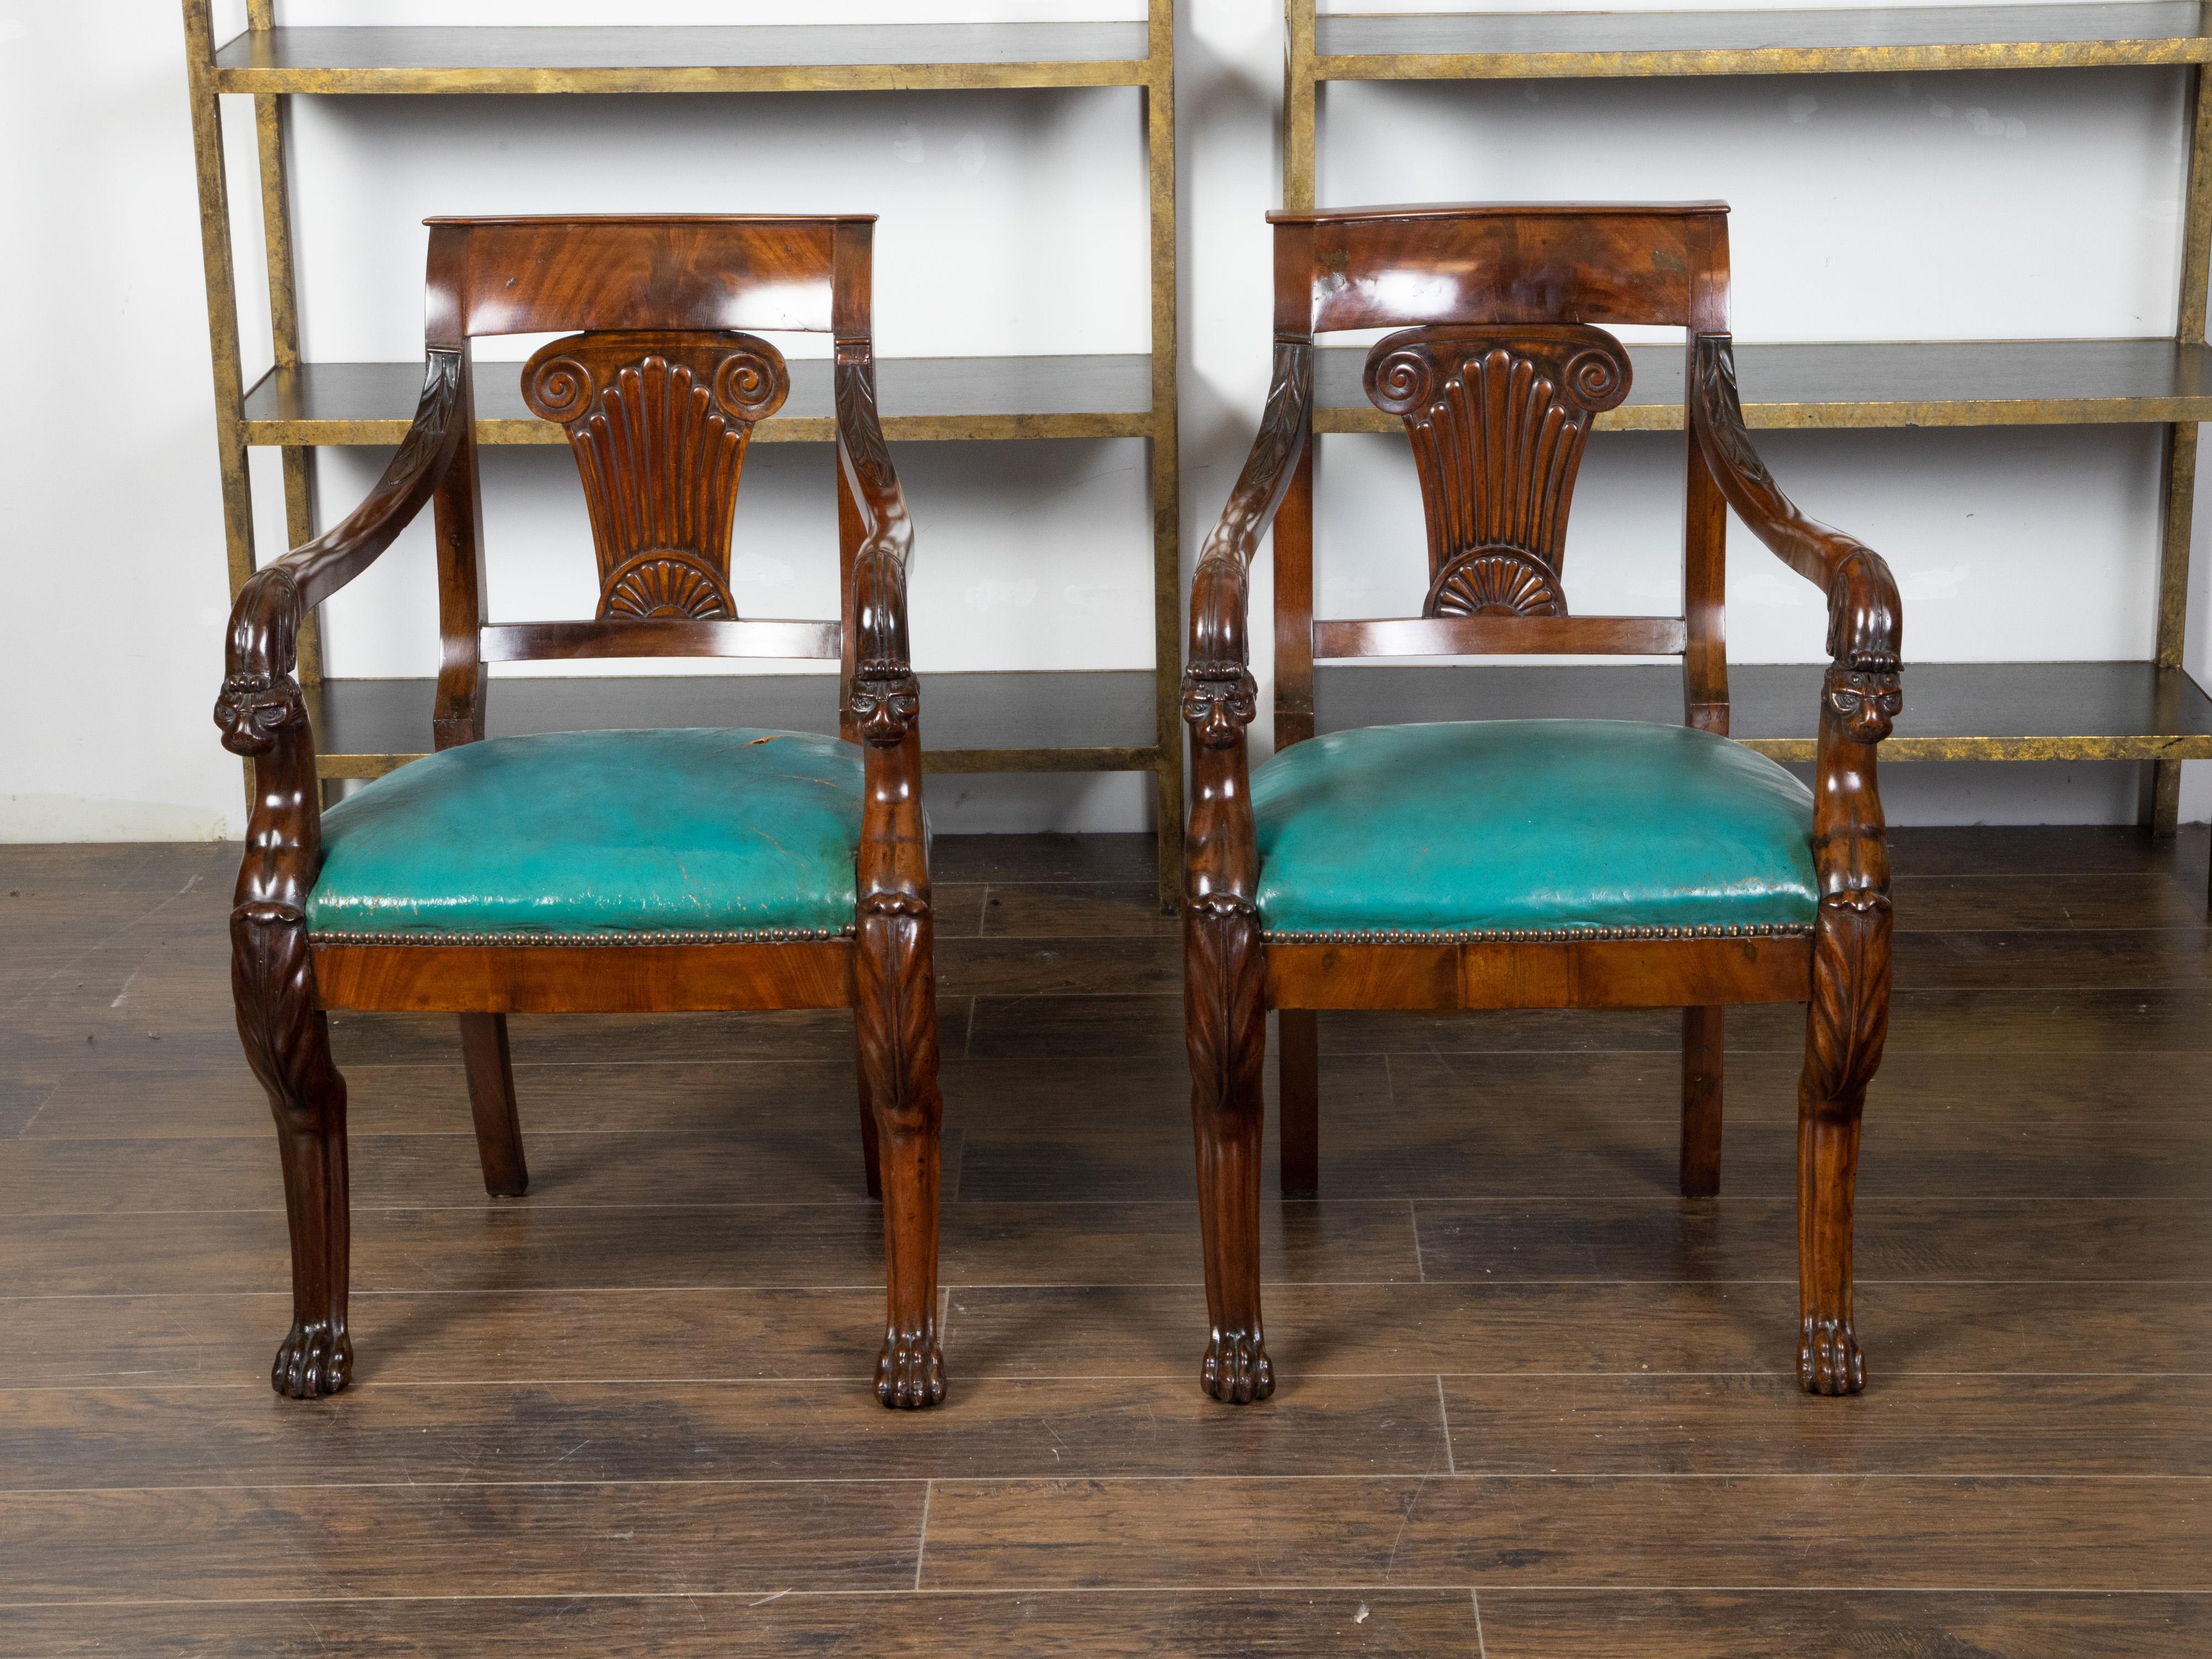 A pair of English Regency period mahogany armchairs from the mid 19th century, with ionic capitals, griffon arms and paw feet. Created in England during the second quarter of the 19th century, each of this pair of armchairs attracts our attention